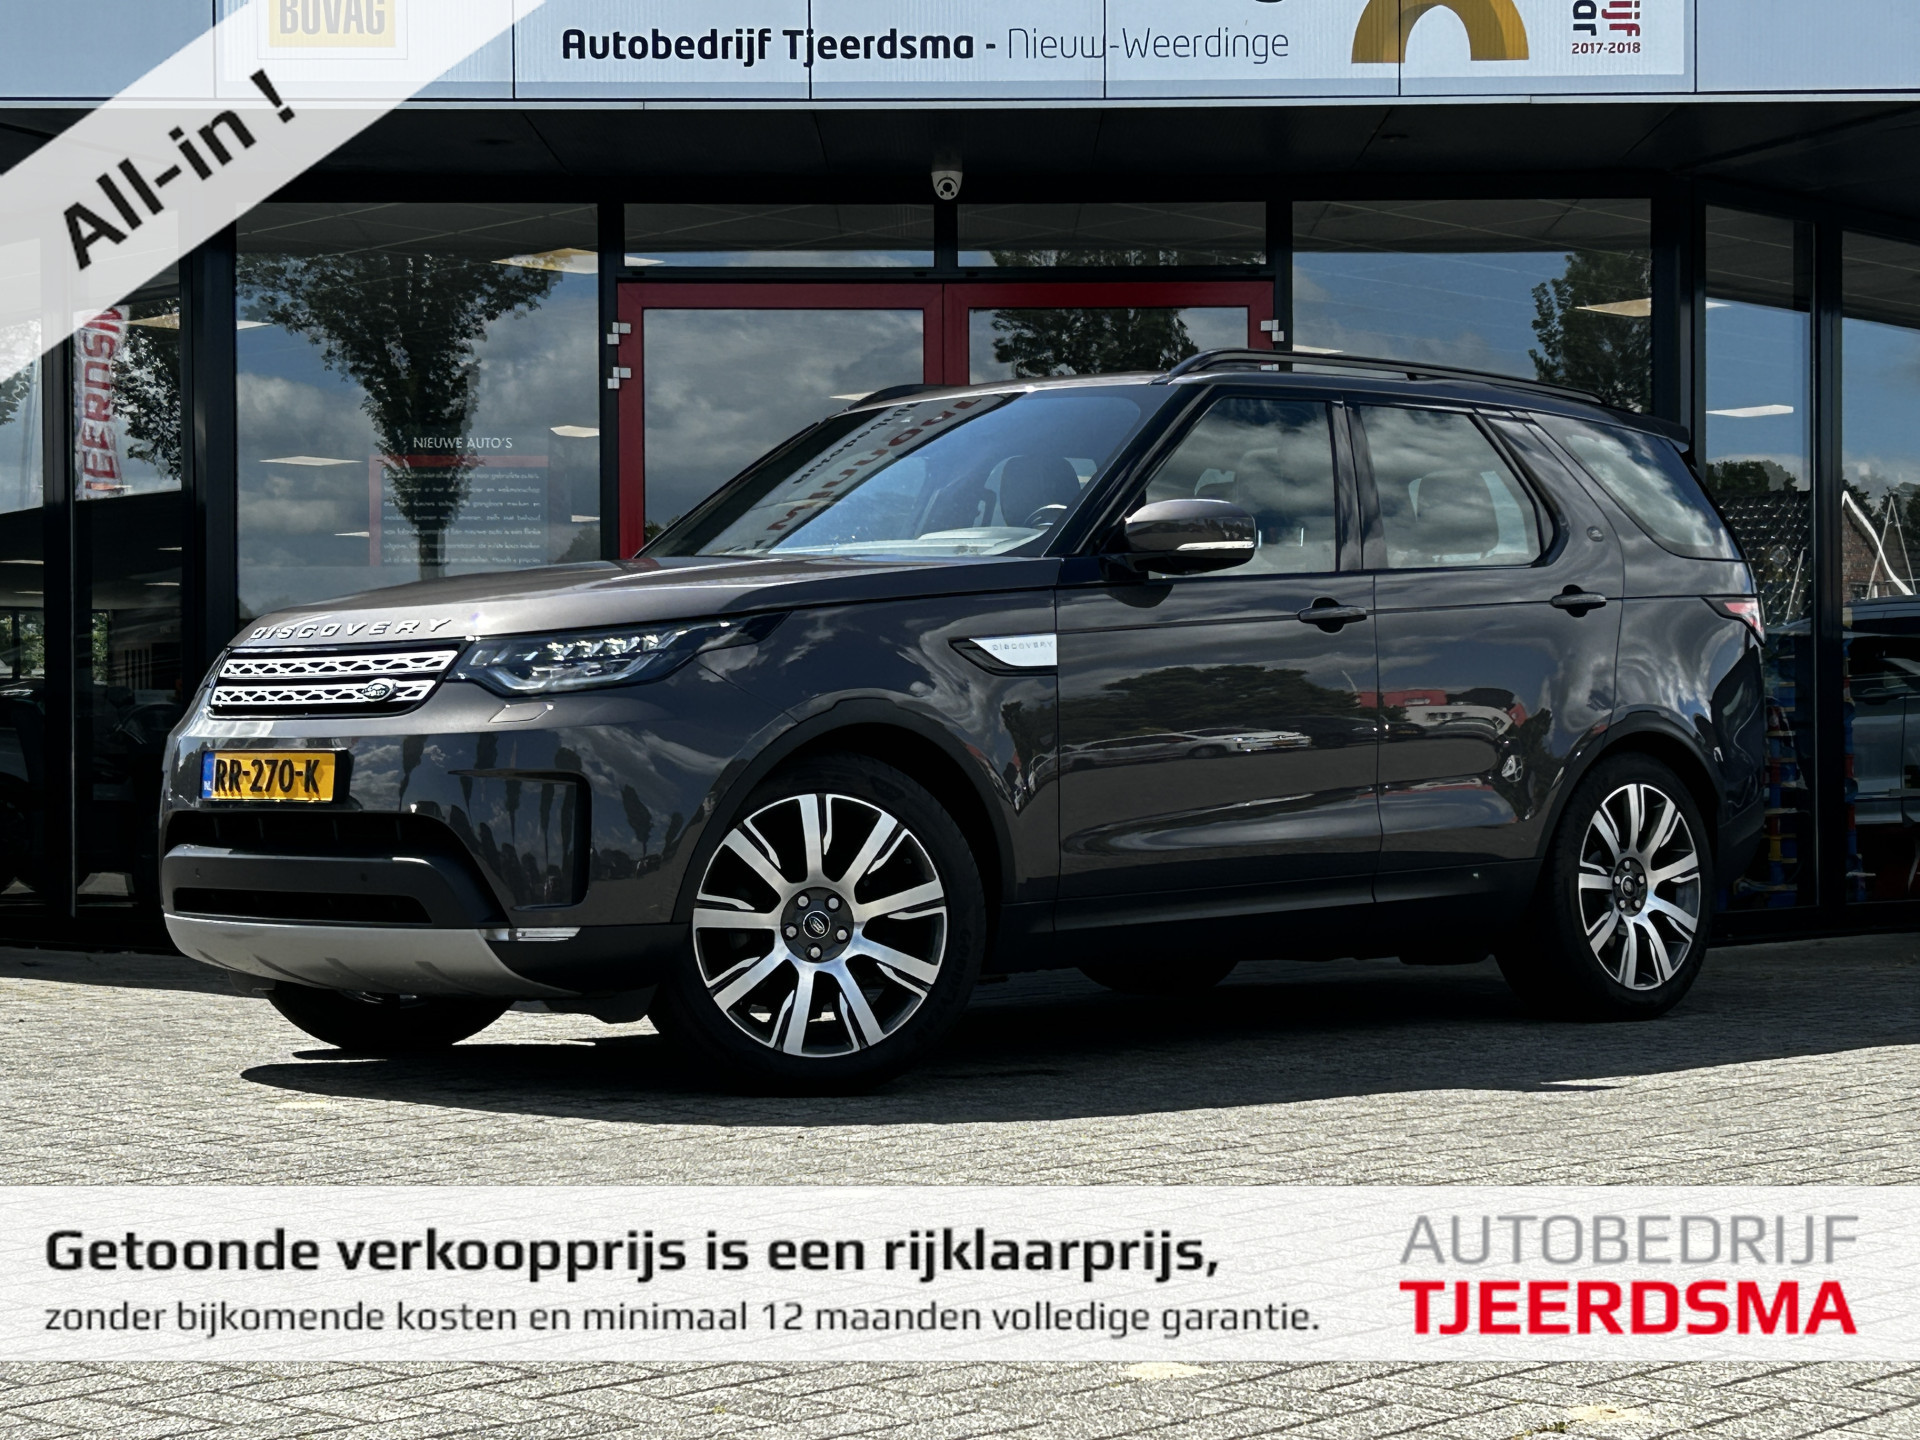 Land Rover Discovery 2.0 Sd4 HSE Luxury 7p. Navi/Clima/Leder/Panodak/7-Persoons/Luchtvering/Trekhaak